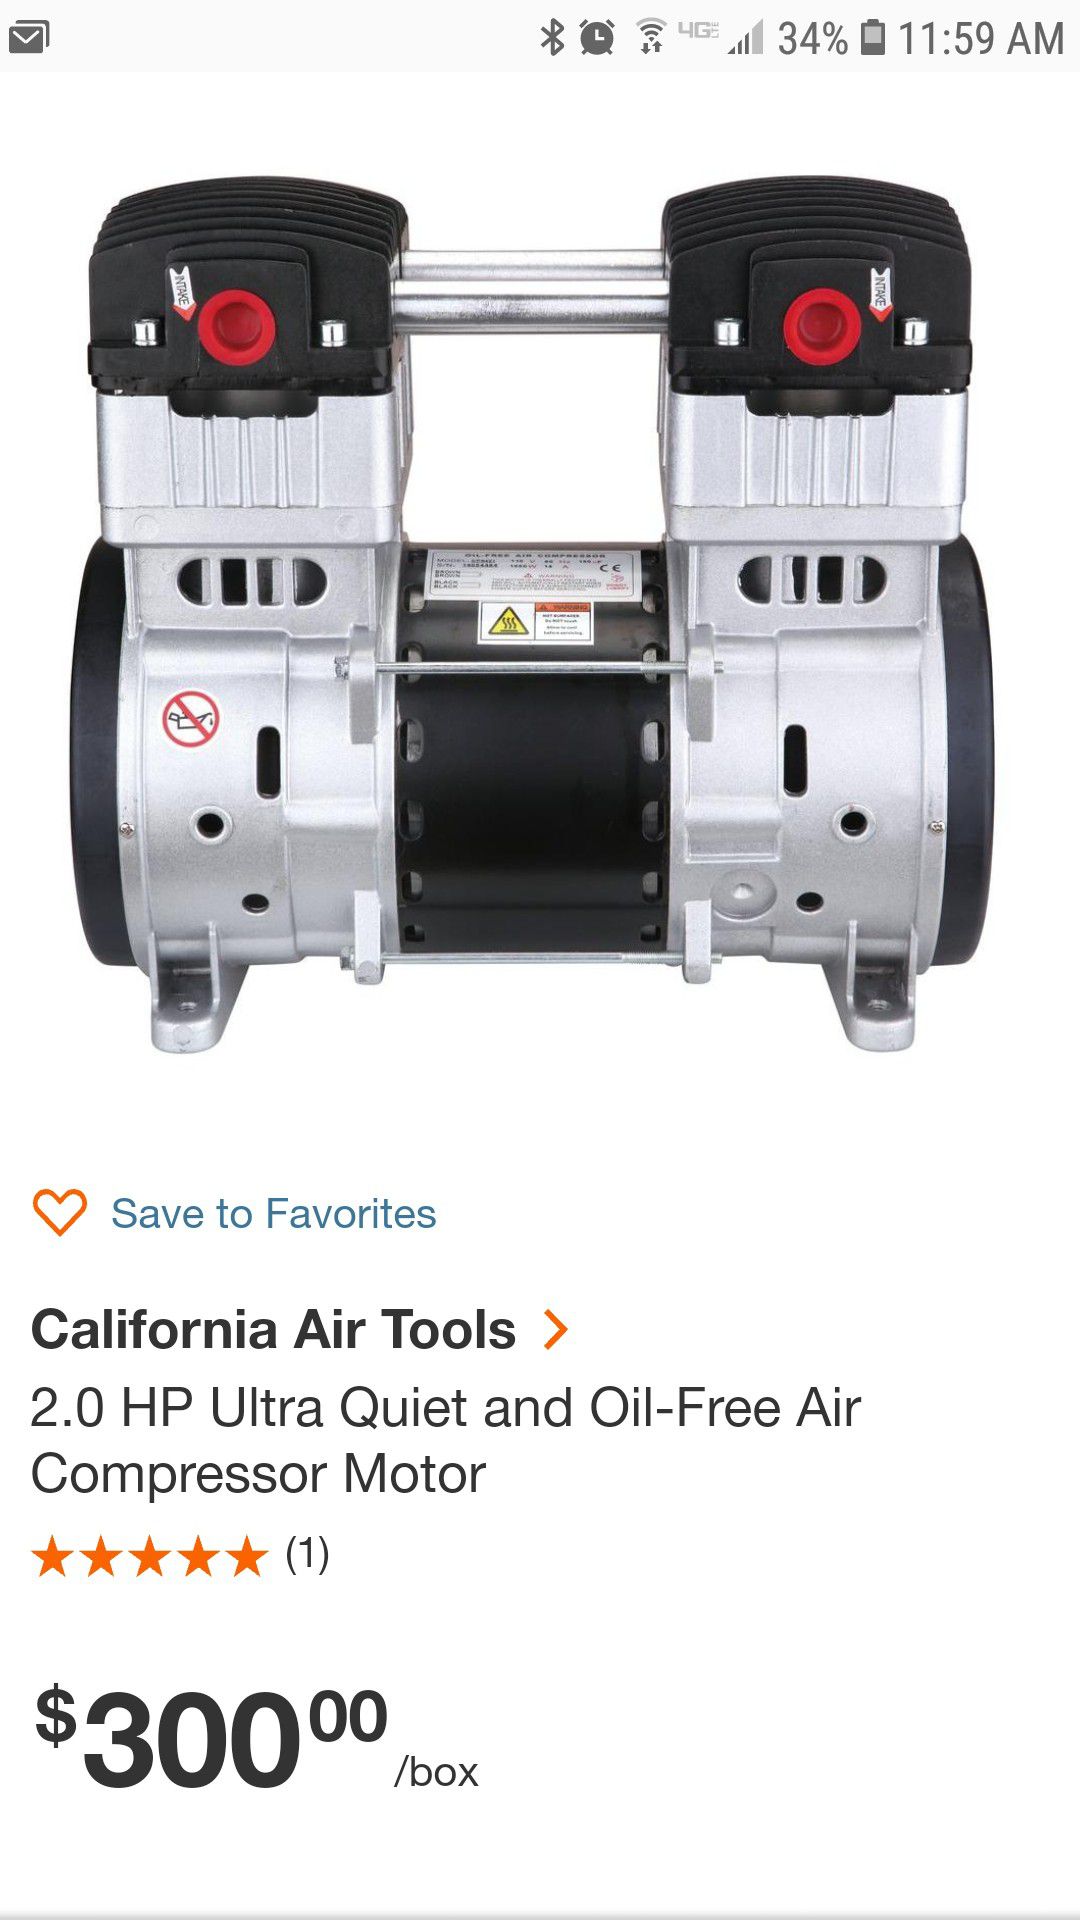 California Air Tools SP-9421 2.0HP Ultra Quiet and Oil-Free Air Compressor  Motor for Sale in Corona, CA OfferUp